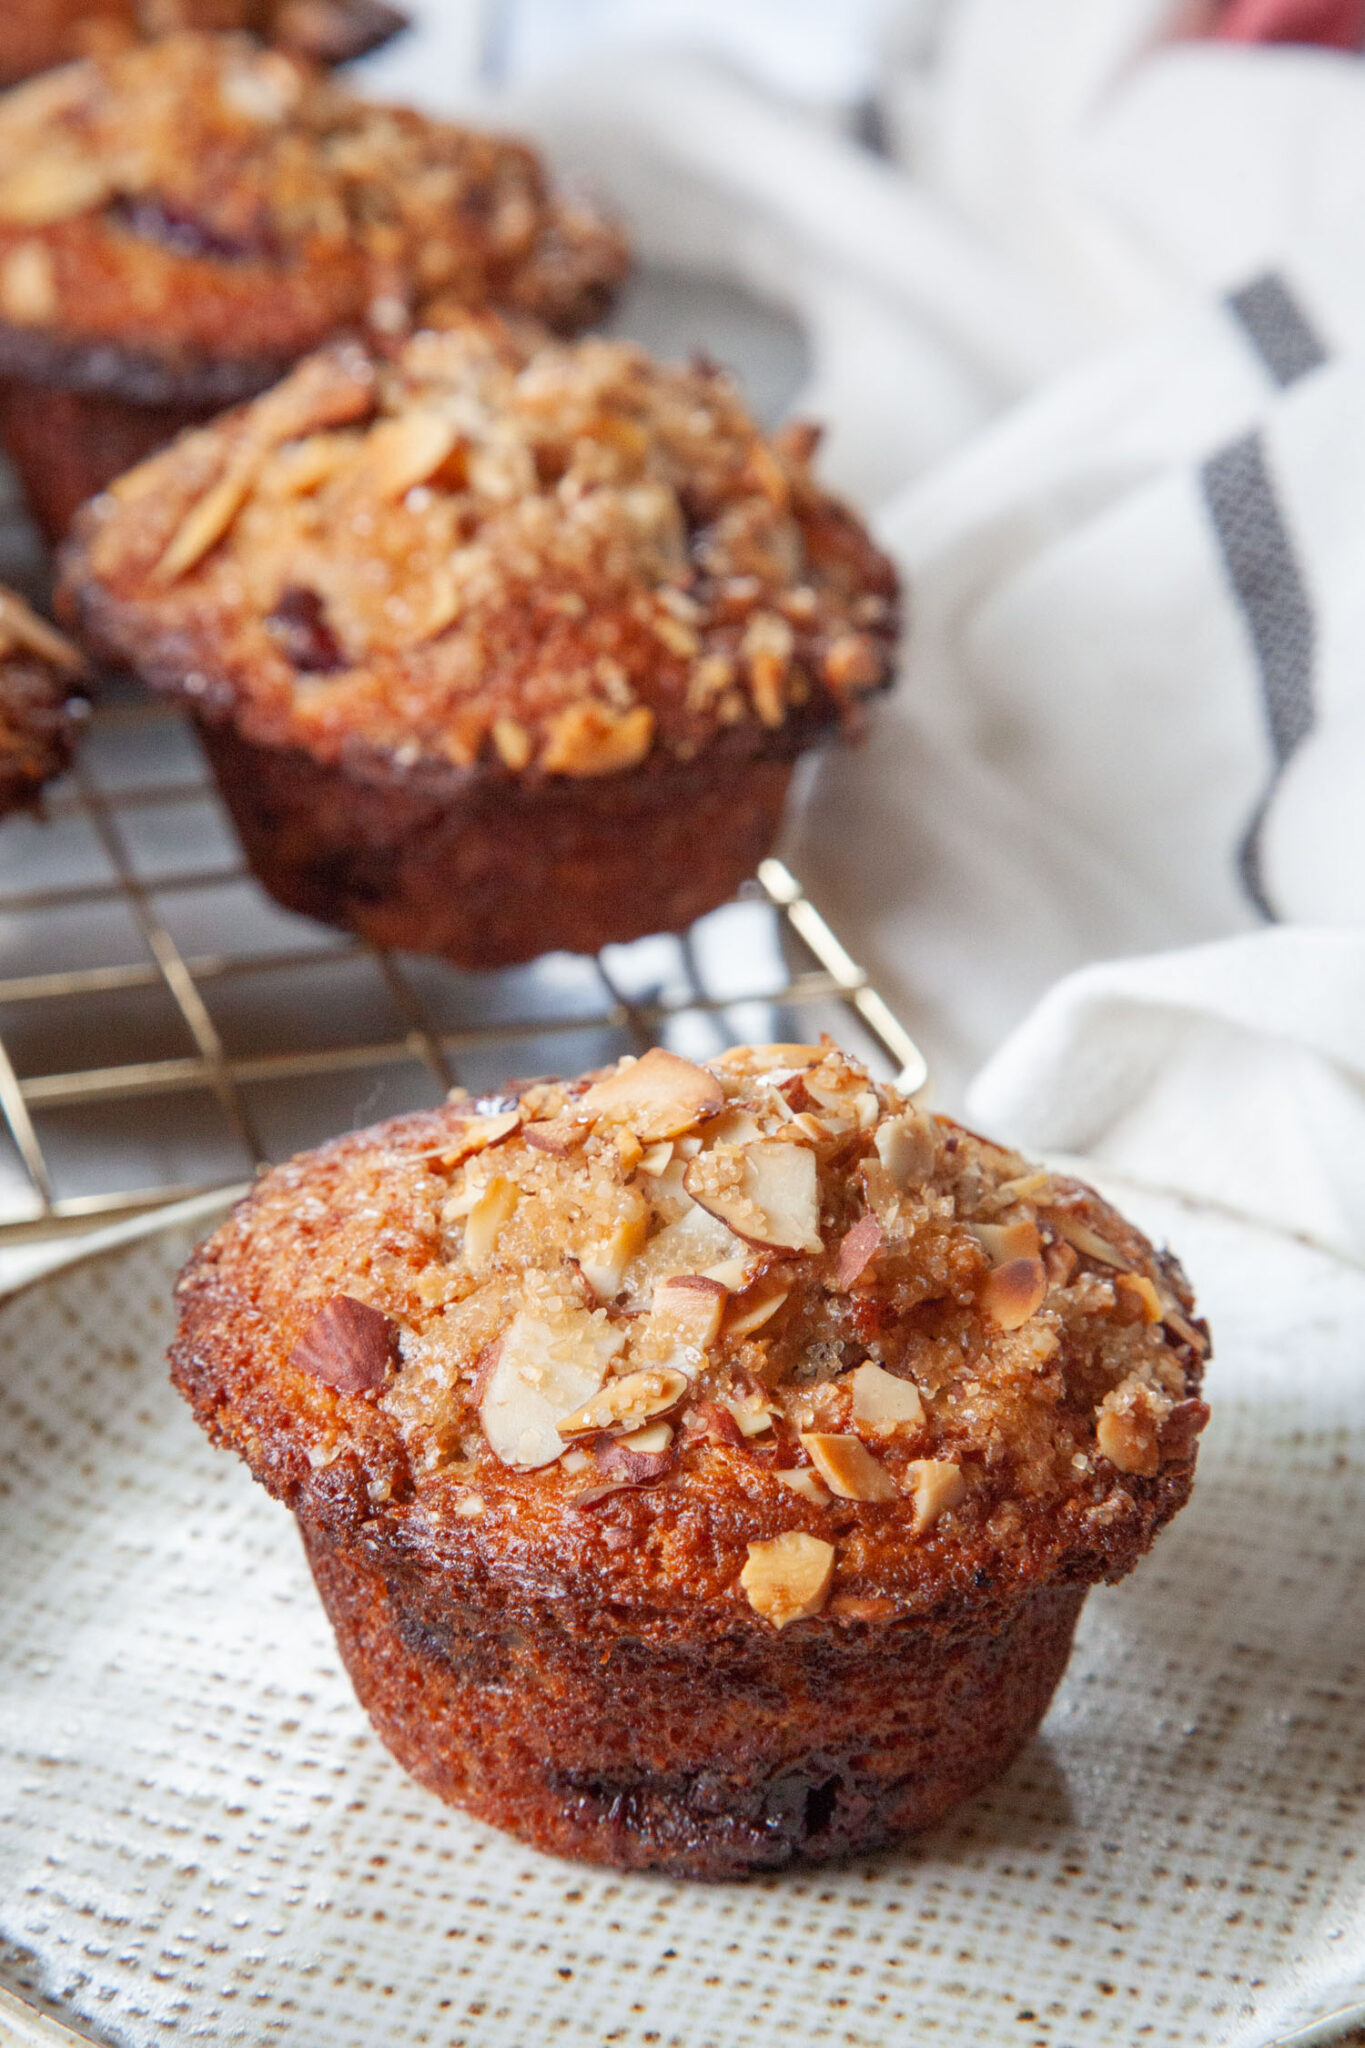 A cherry almond muffin on a plate with more muffins on a cooling rack behind it.